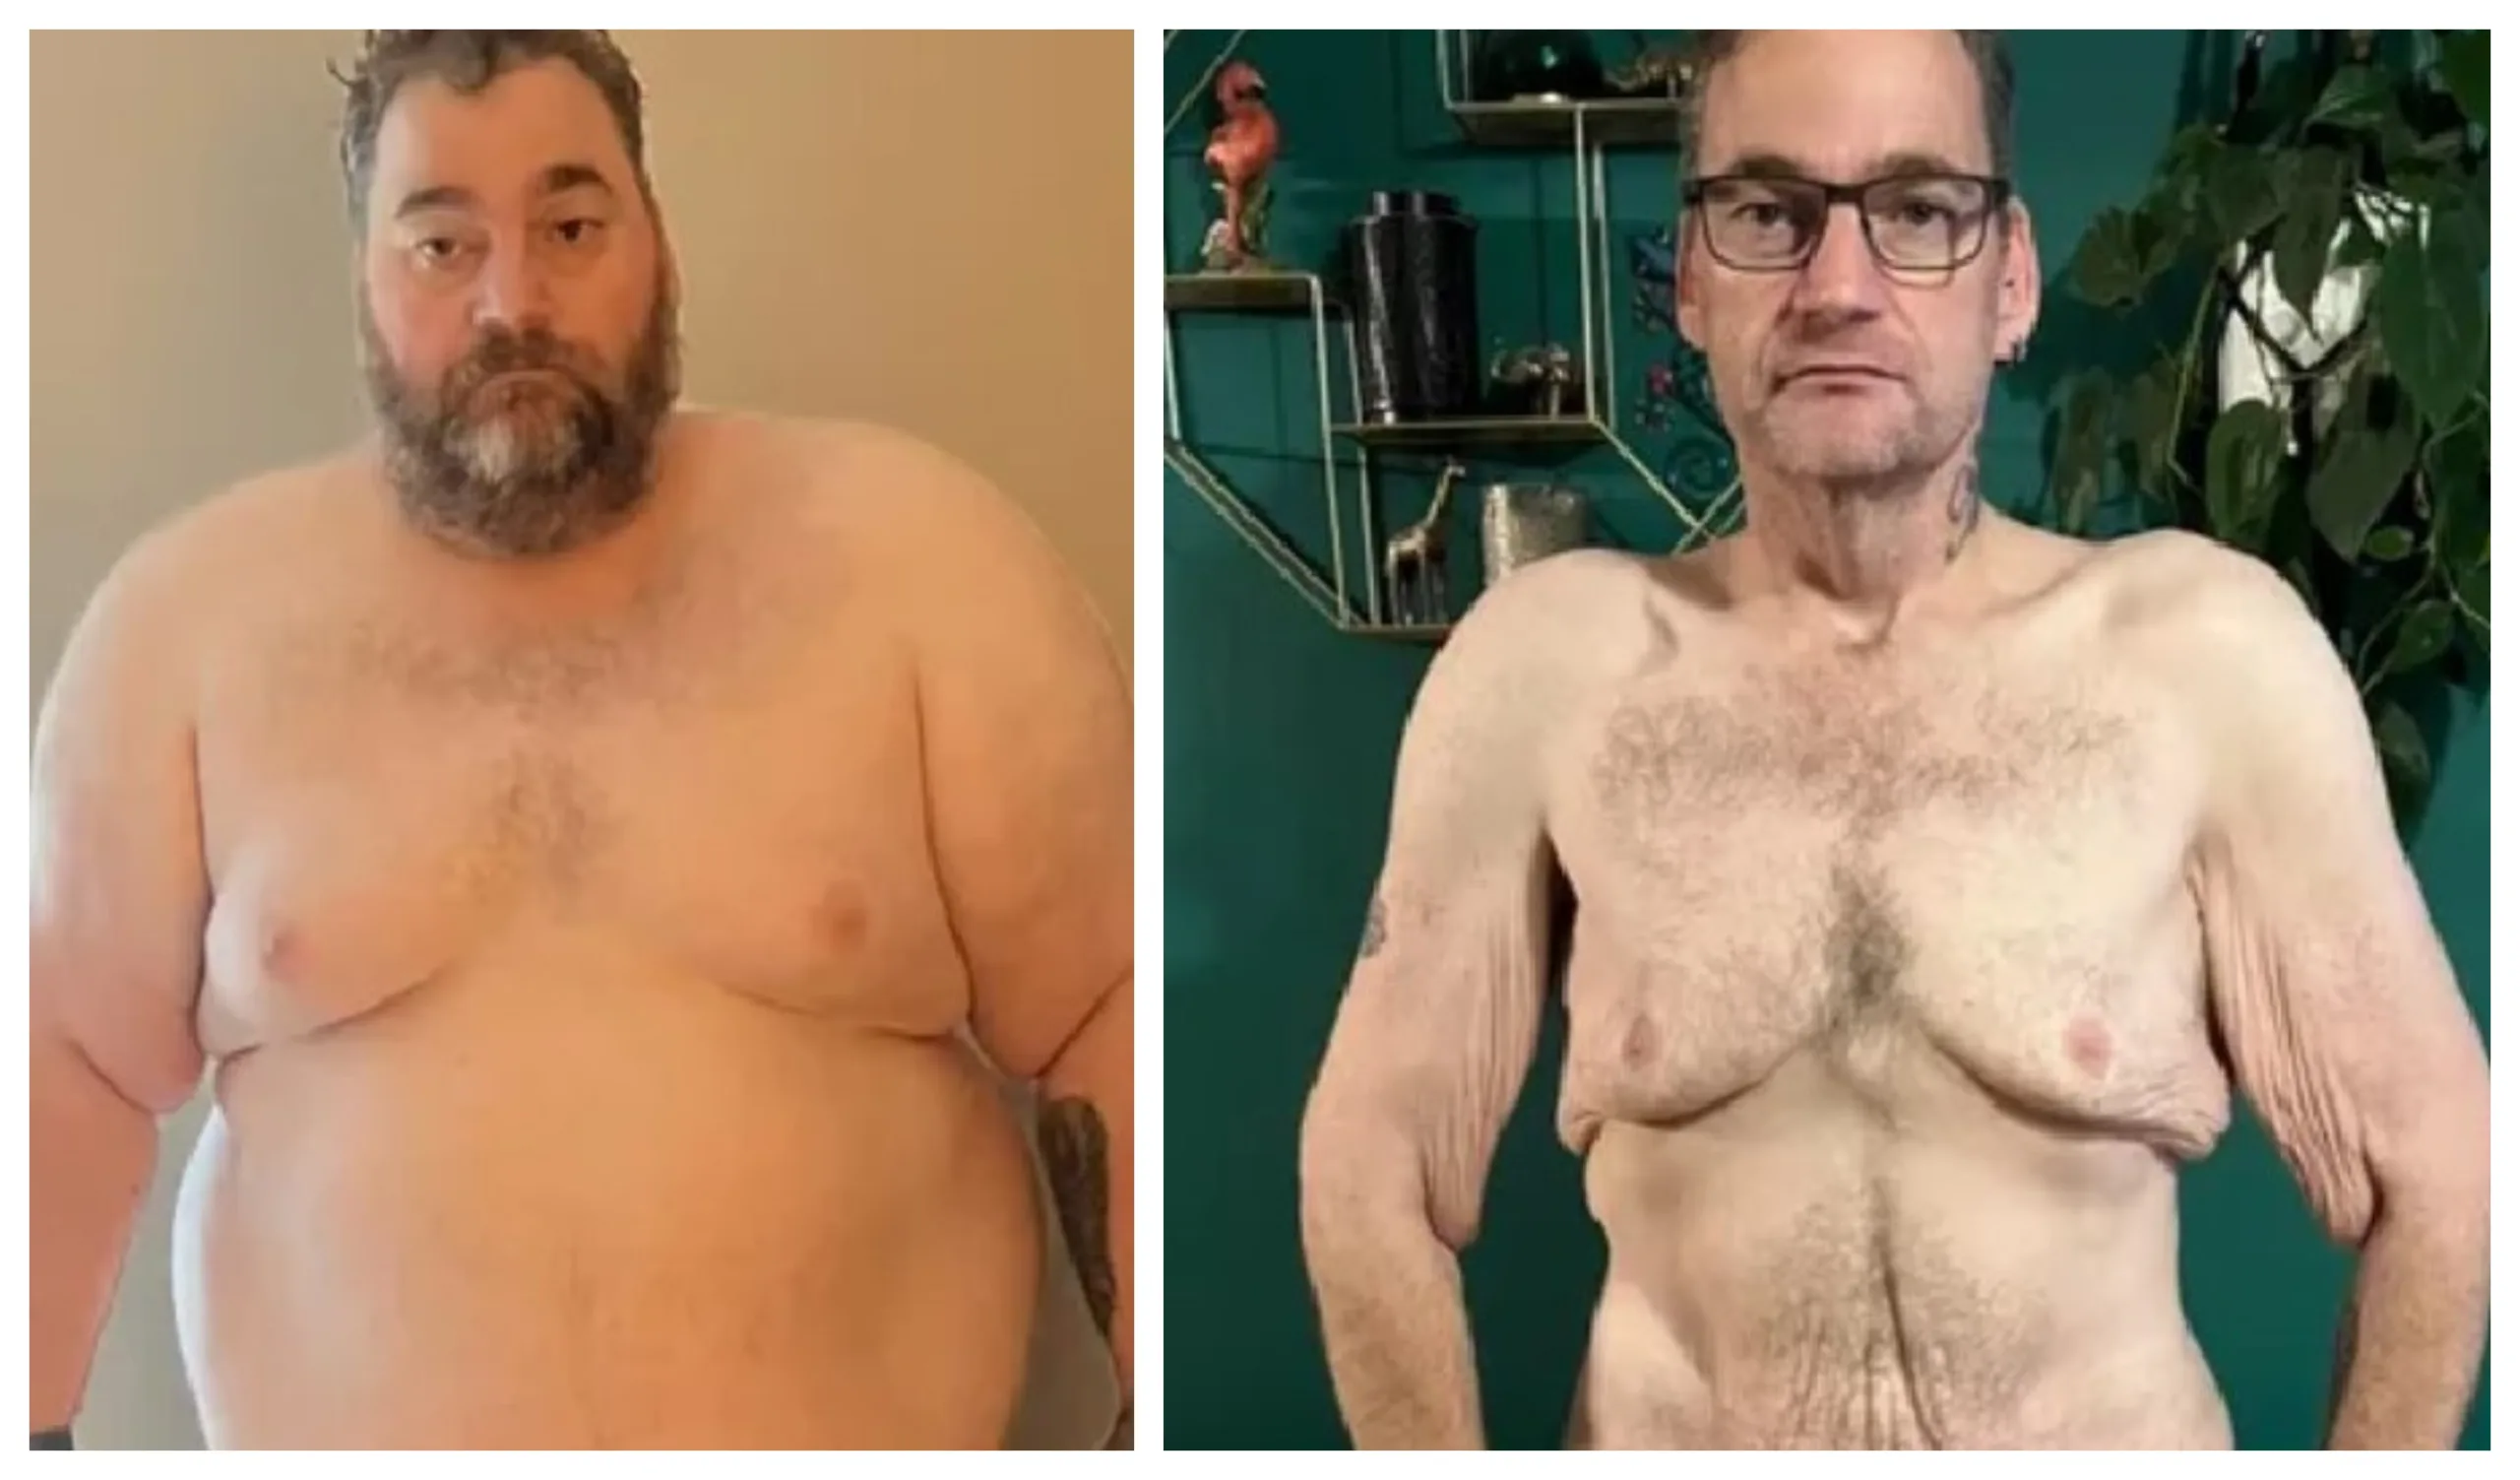 Before and after for Wayne Shepherd: “I know I got myself in to this mess by putting the weight on in the first place but it’s not that simple at all. there was so many more factors than just over eating.”